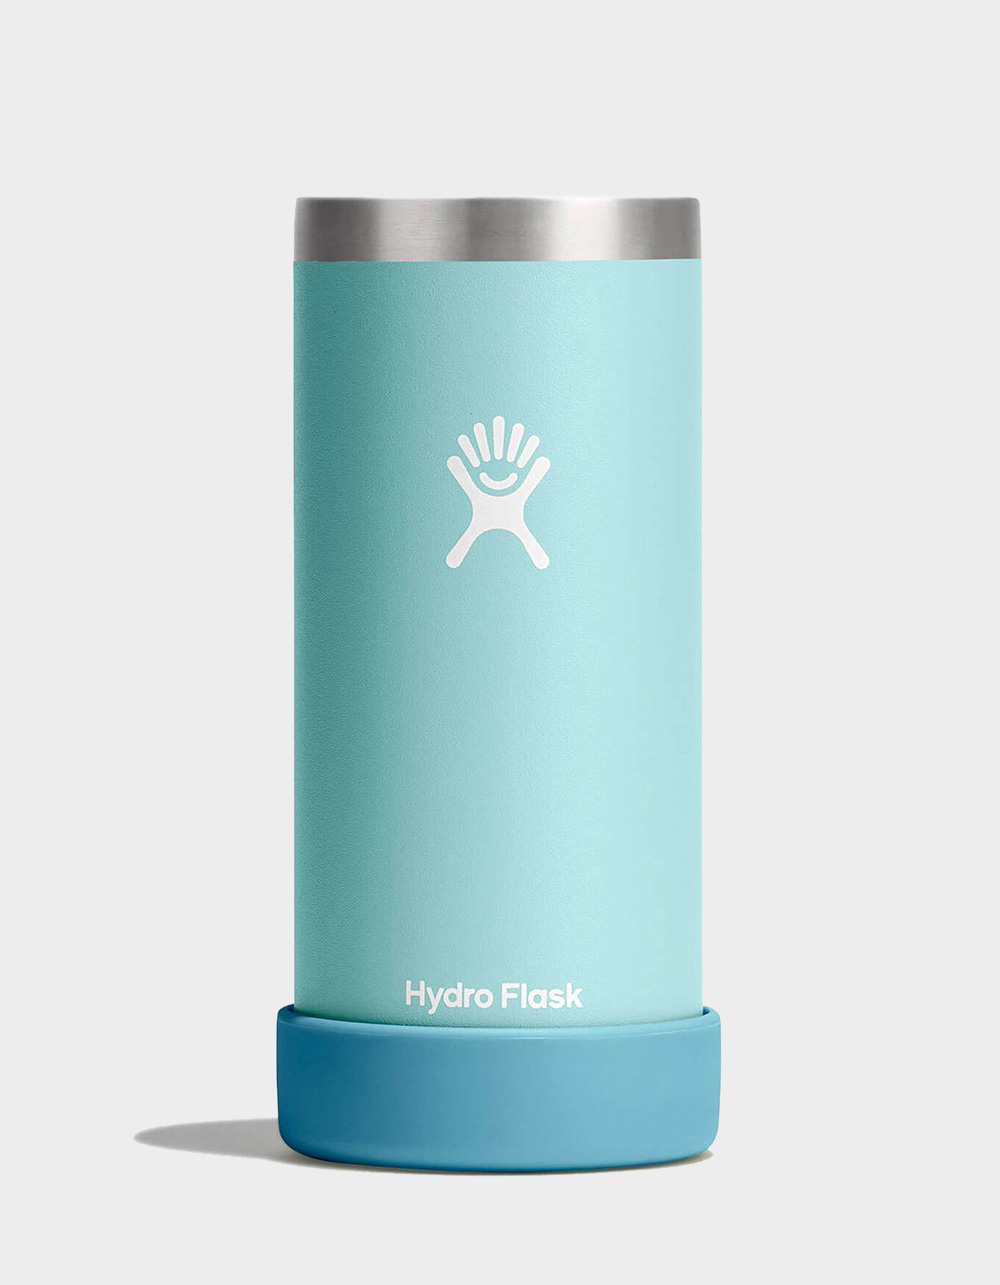 40oz Hydroflask Cup Holder by Eli